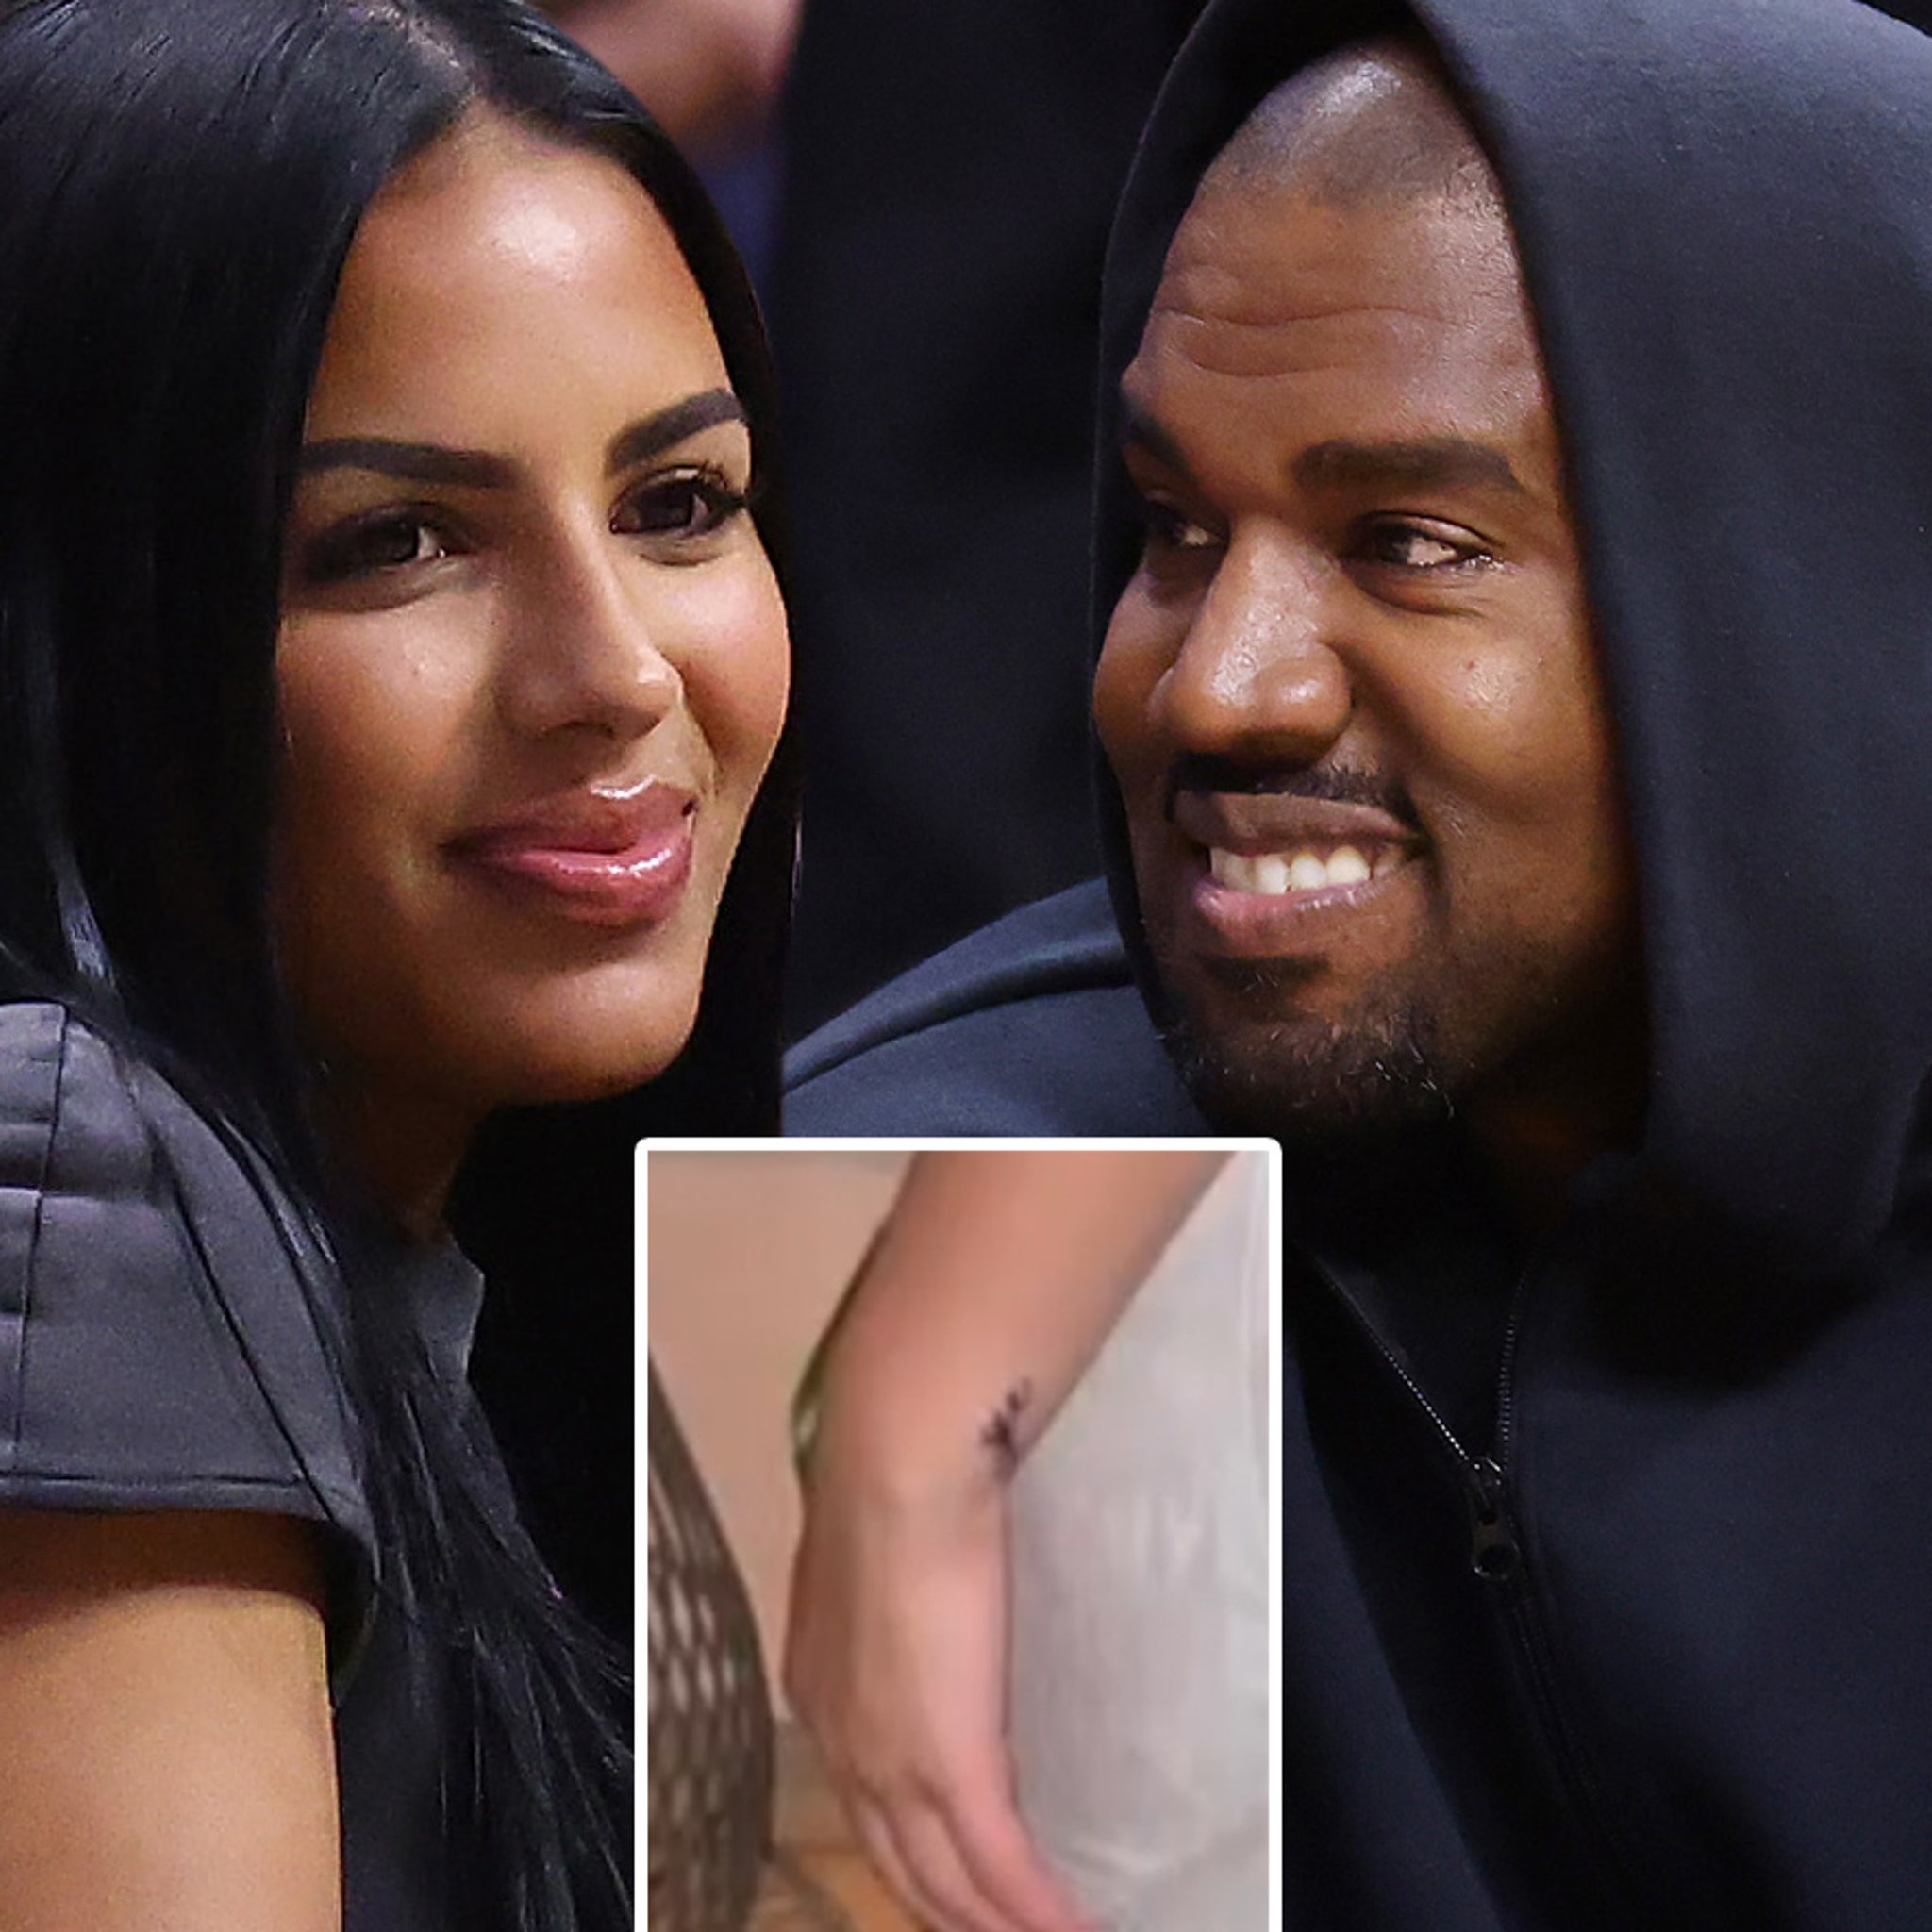 NTT Tattoo studio offers free removal of Kanye West tattoos